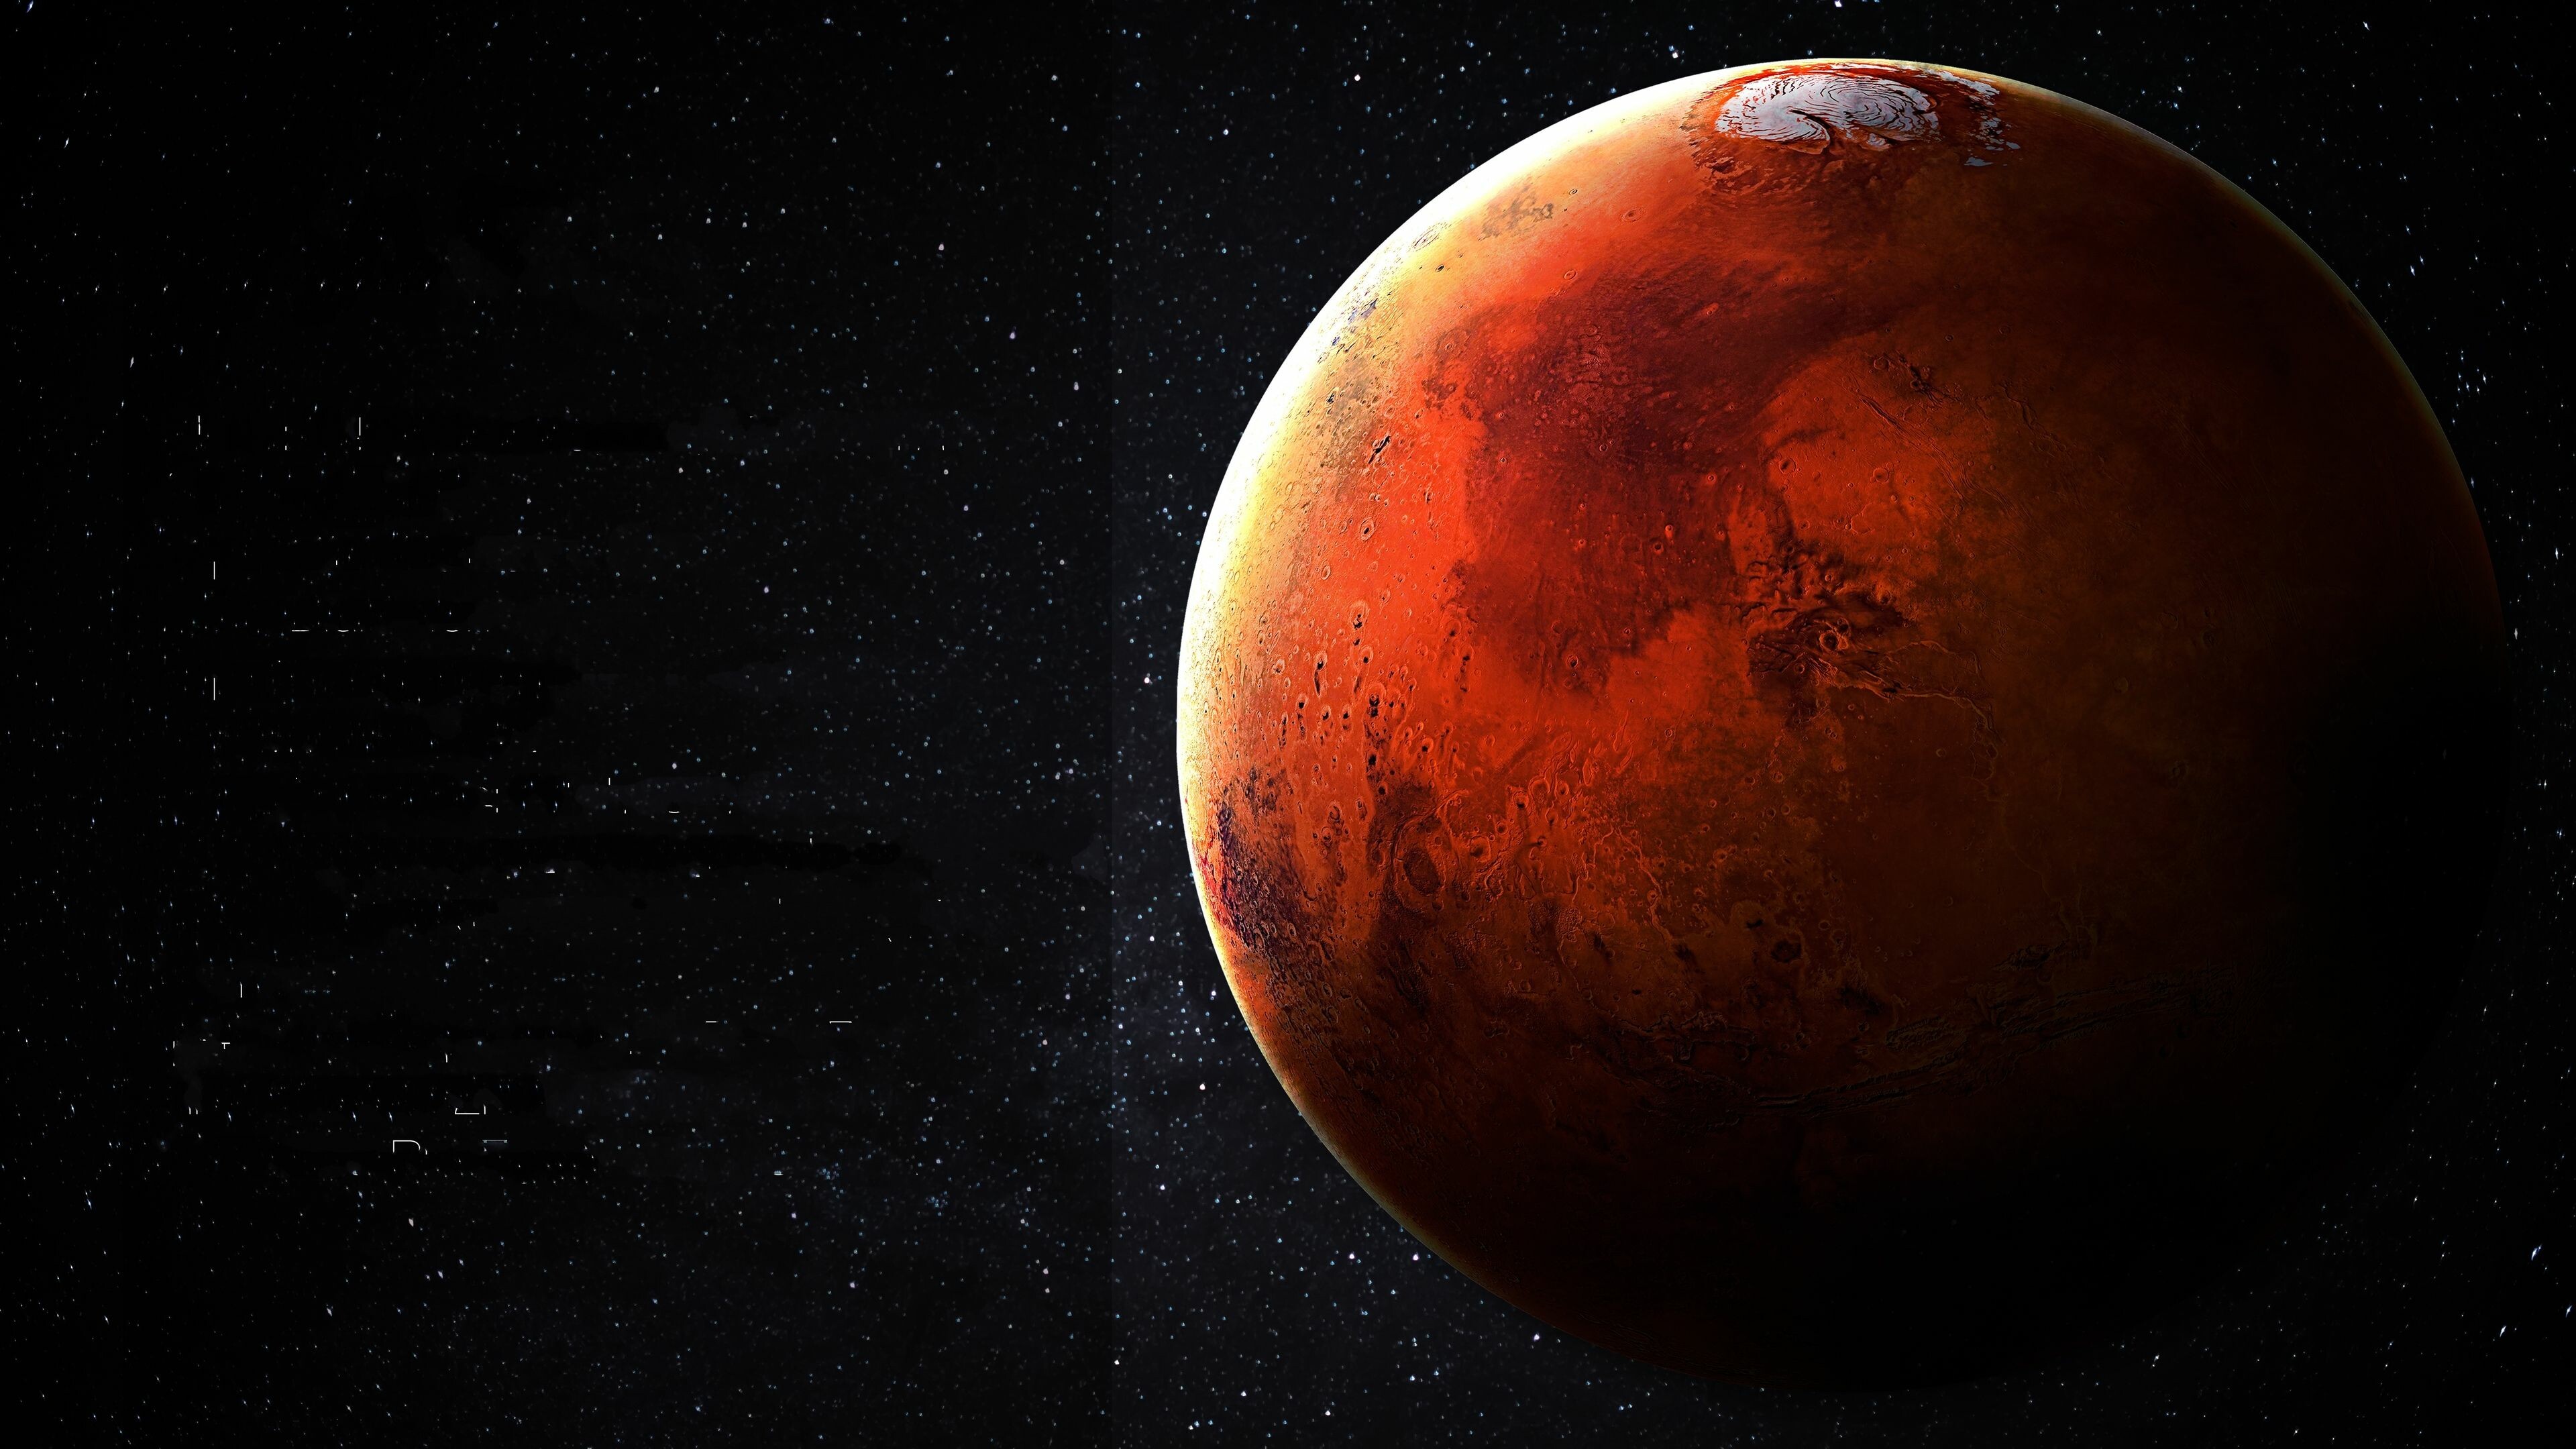 Mars: The fourth planet from the Sun, Stars, Galaxy. 3840x2160 4K Wallpaper.